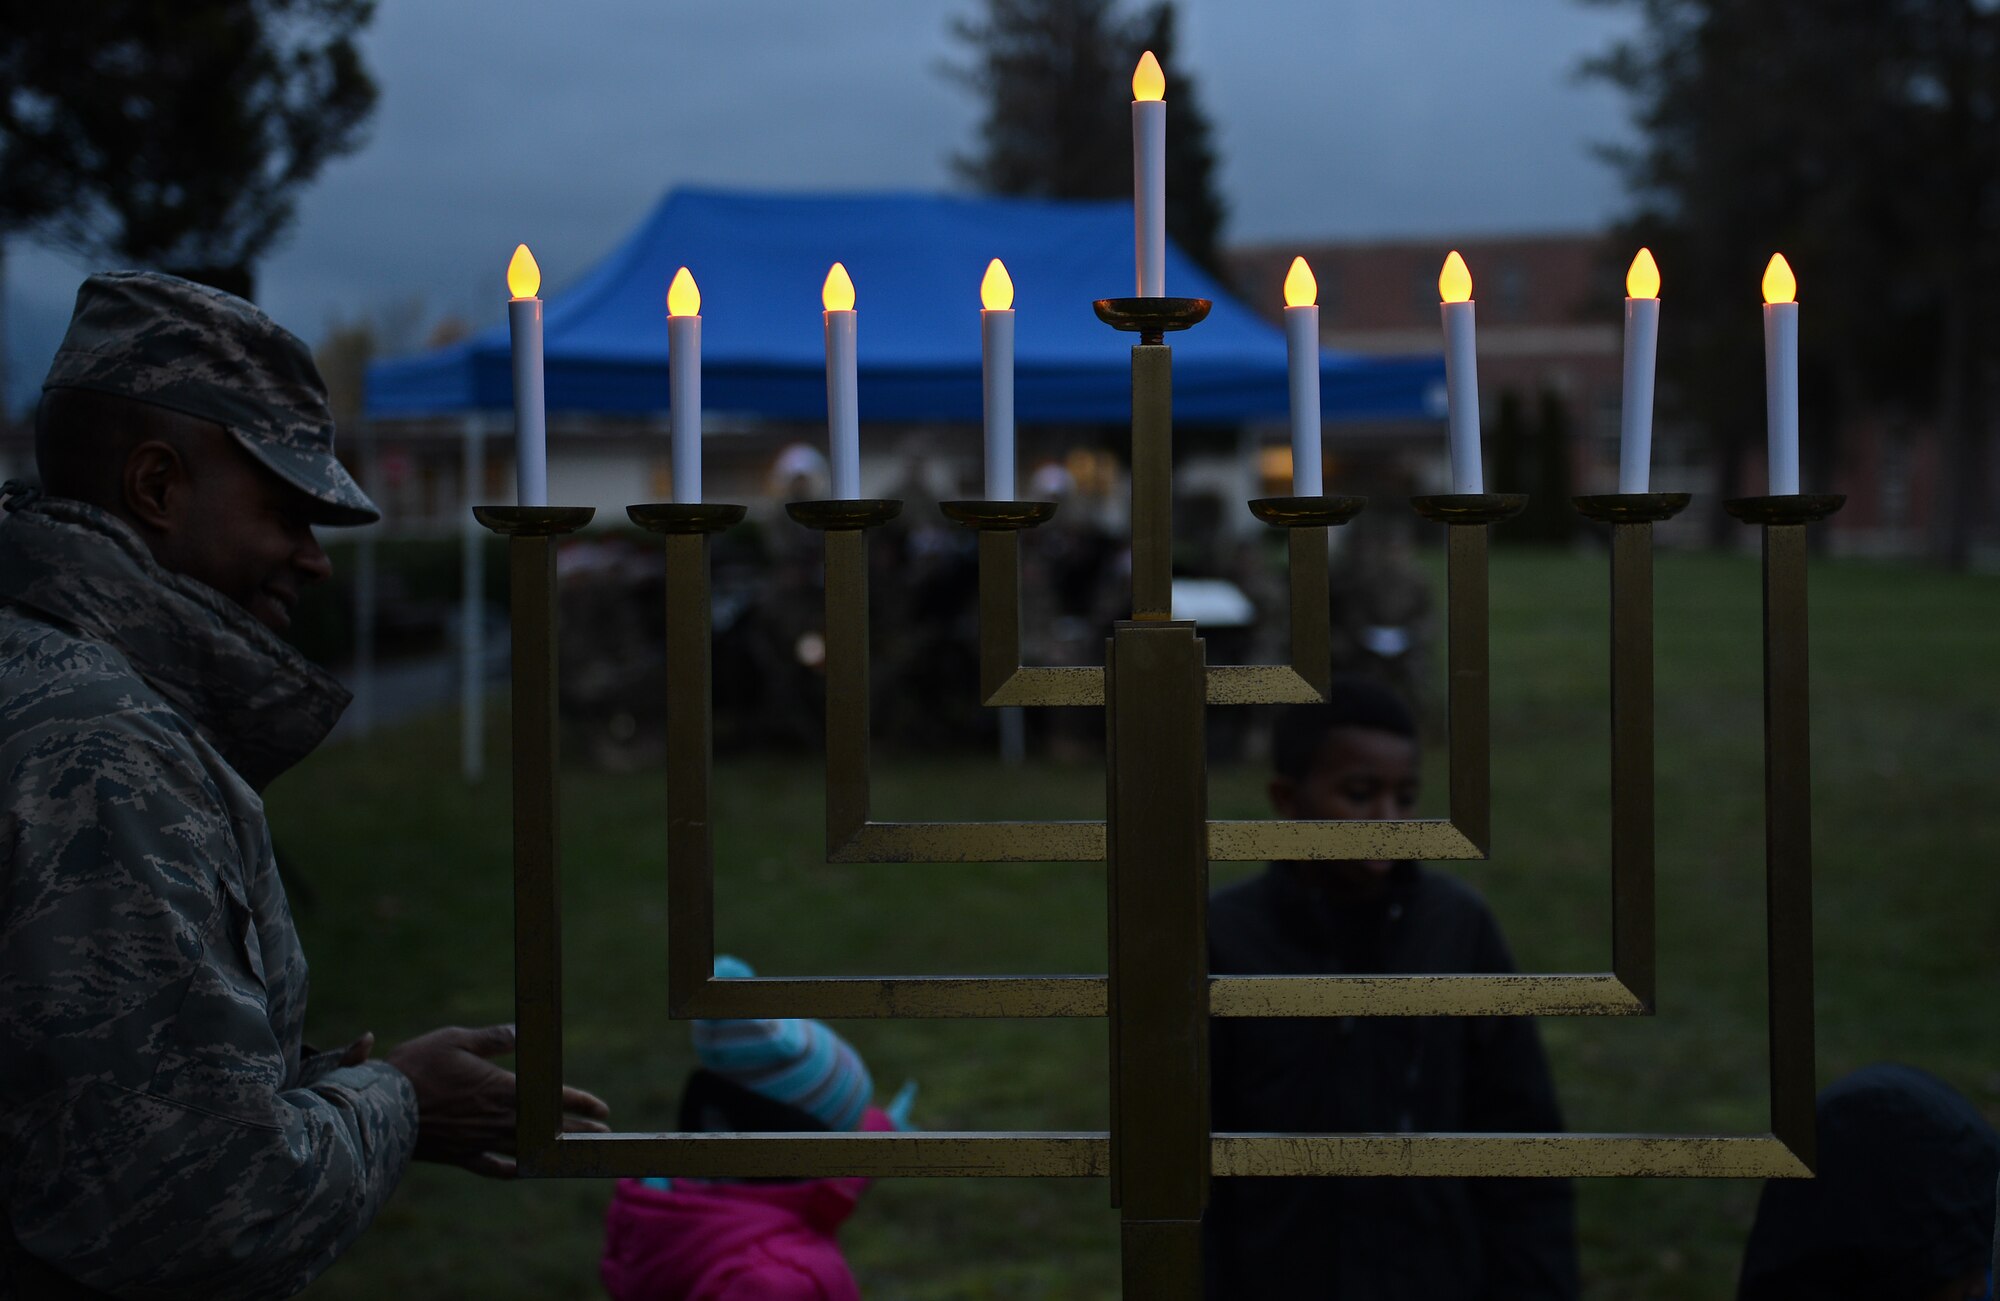 Joint Base Lewis McChord leadership and children light the Menorah during the McChord Field Annual Tree Lighting Ceremony Dec. 5, 2016 at Joint Base Lewis-McChord, Wash. Along with the Menorah, a Christmas tree was also lit during the ceremony. (U.S. Air Force photo/Senior Airman Divine Cox)